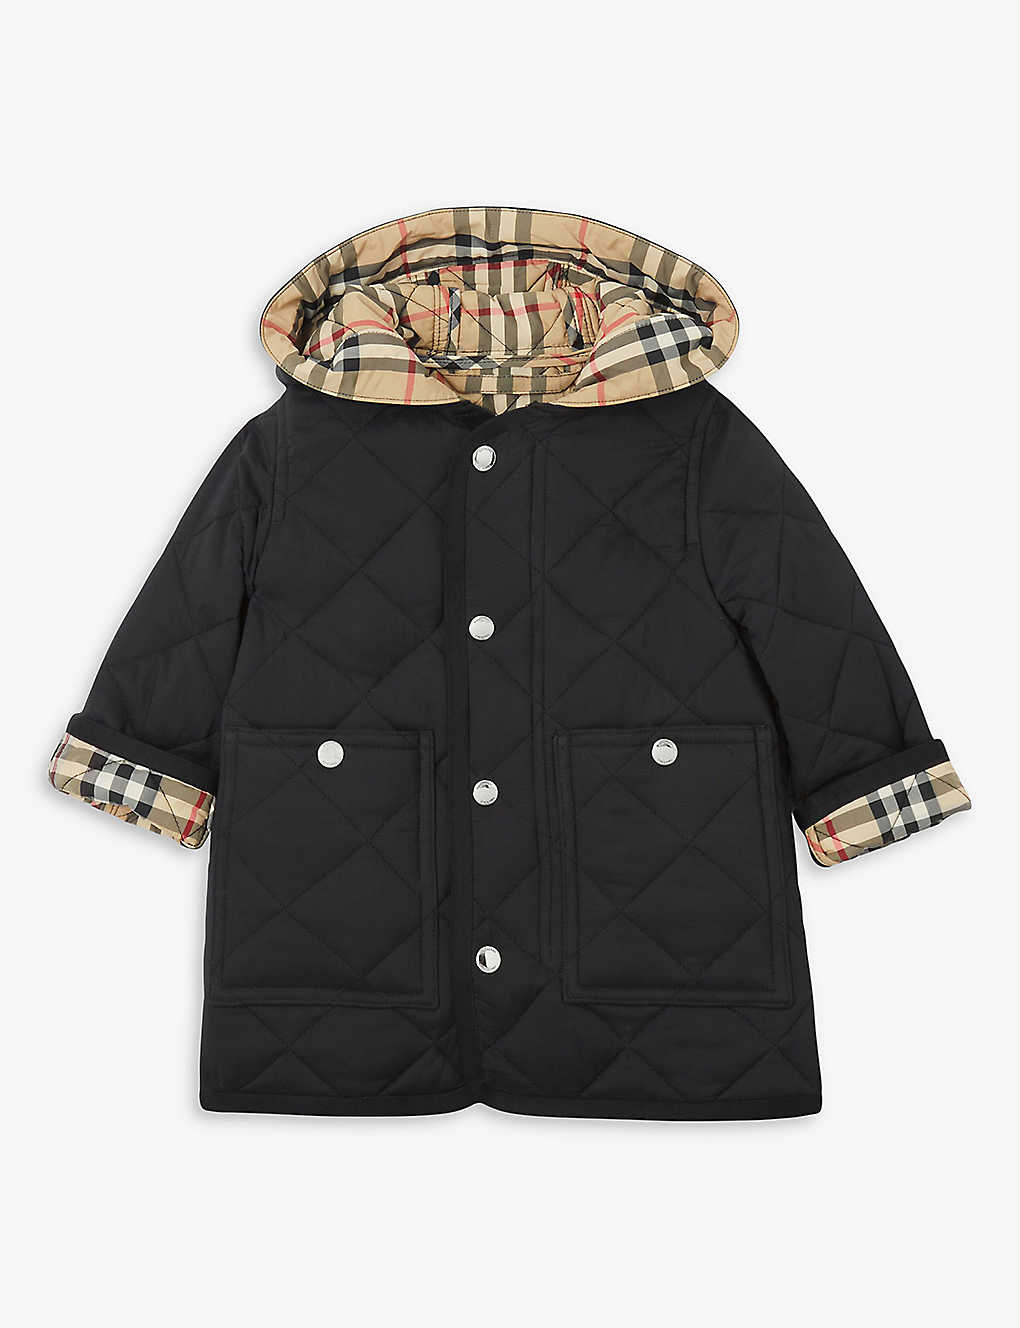 BURBERRY REILLY QUILTED CHECK-LINED SHELL JACKET 6-24 MONTHS,56795500